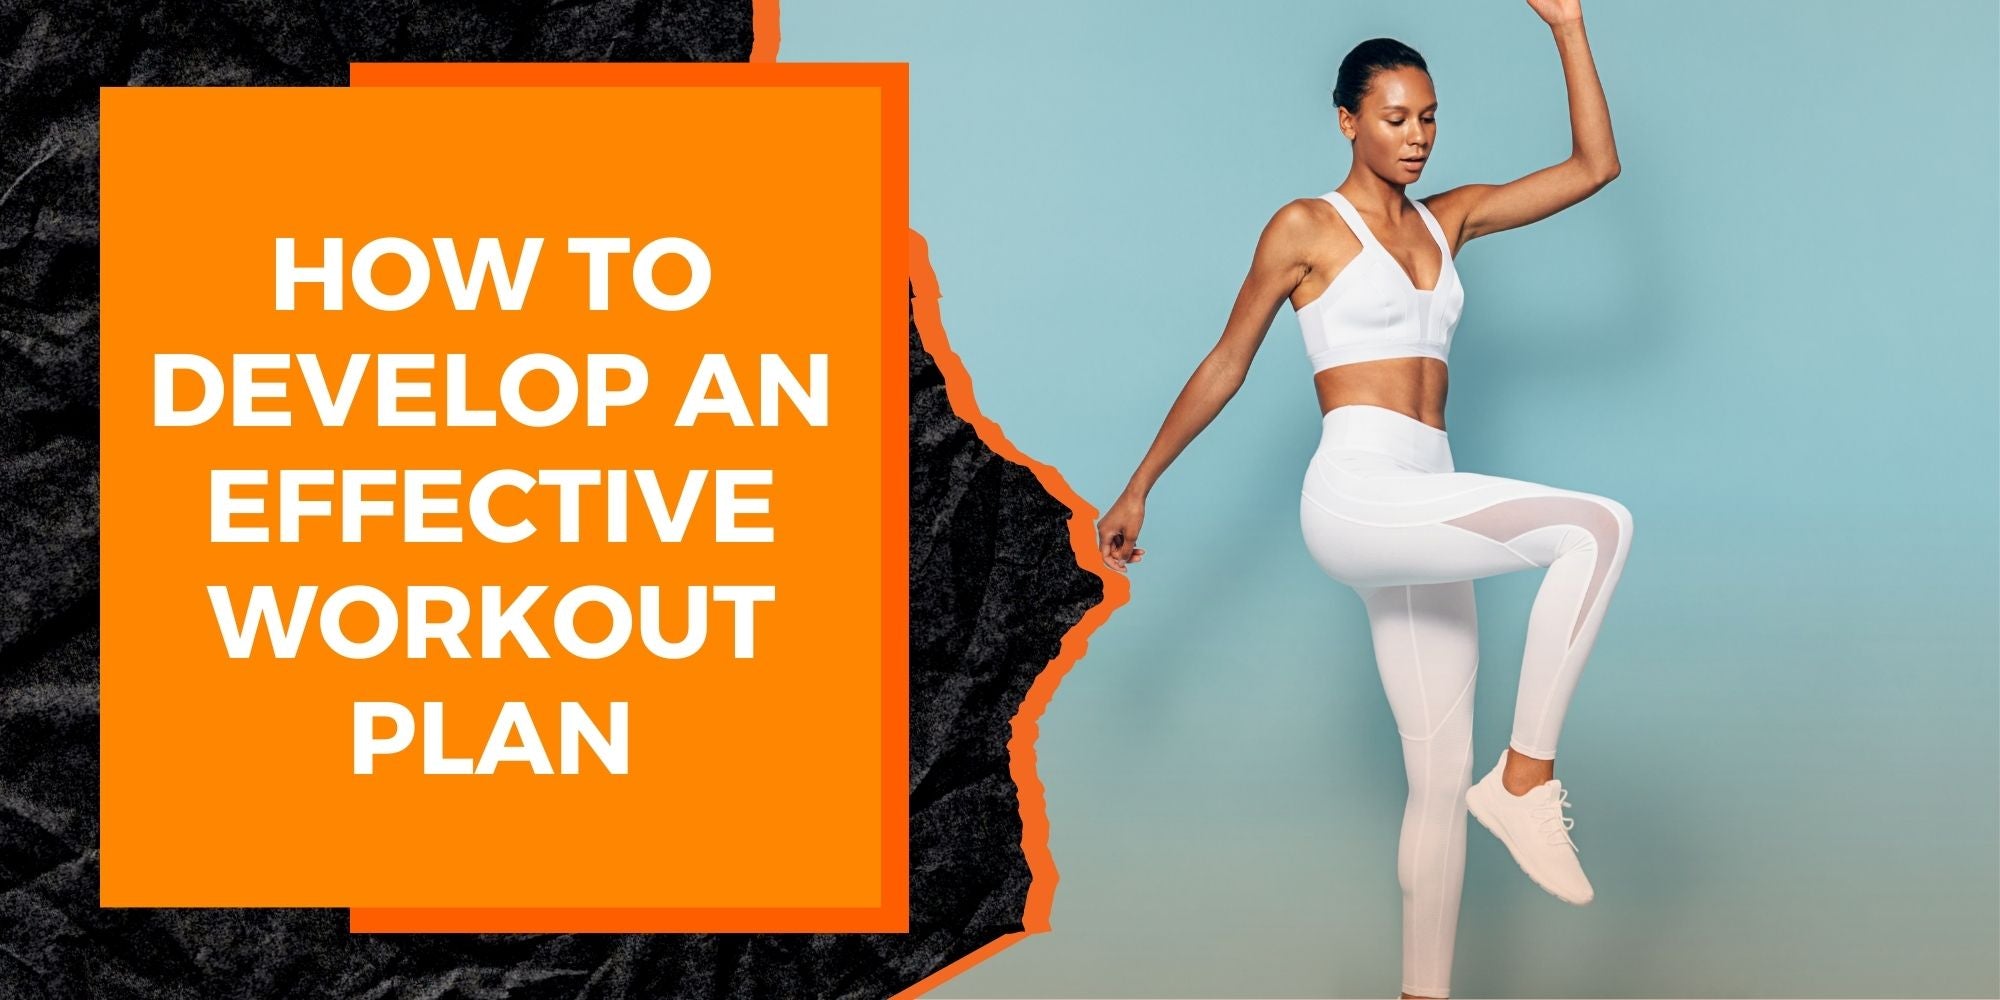 How to Develop an Effective Workout Plan